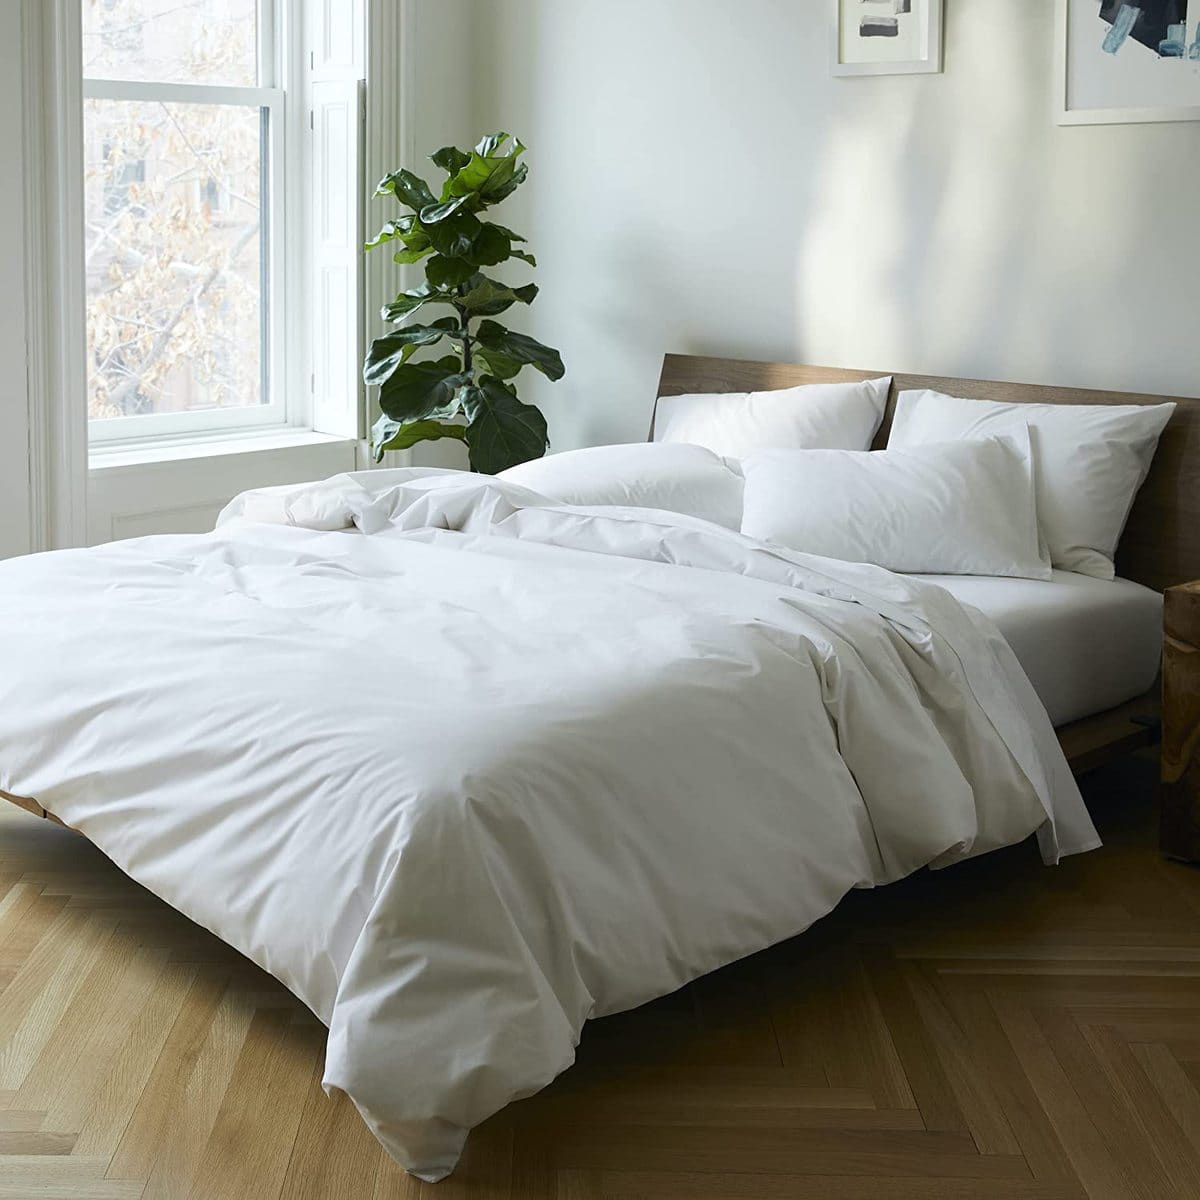 Bed set with white Brooklinen Luxe sheets